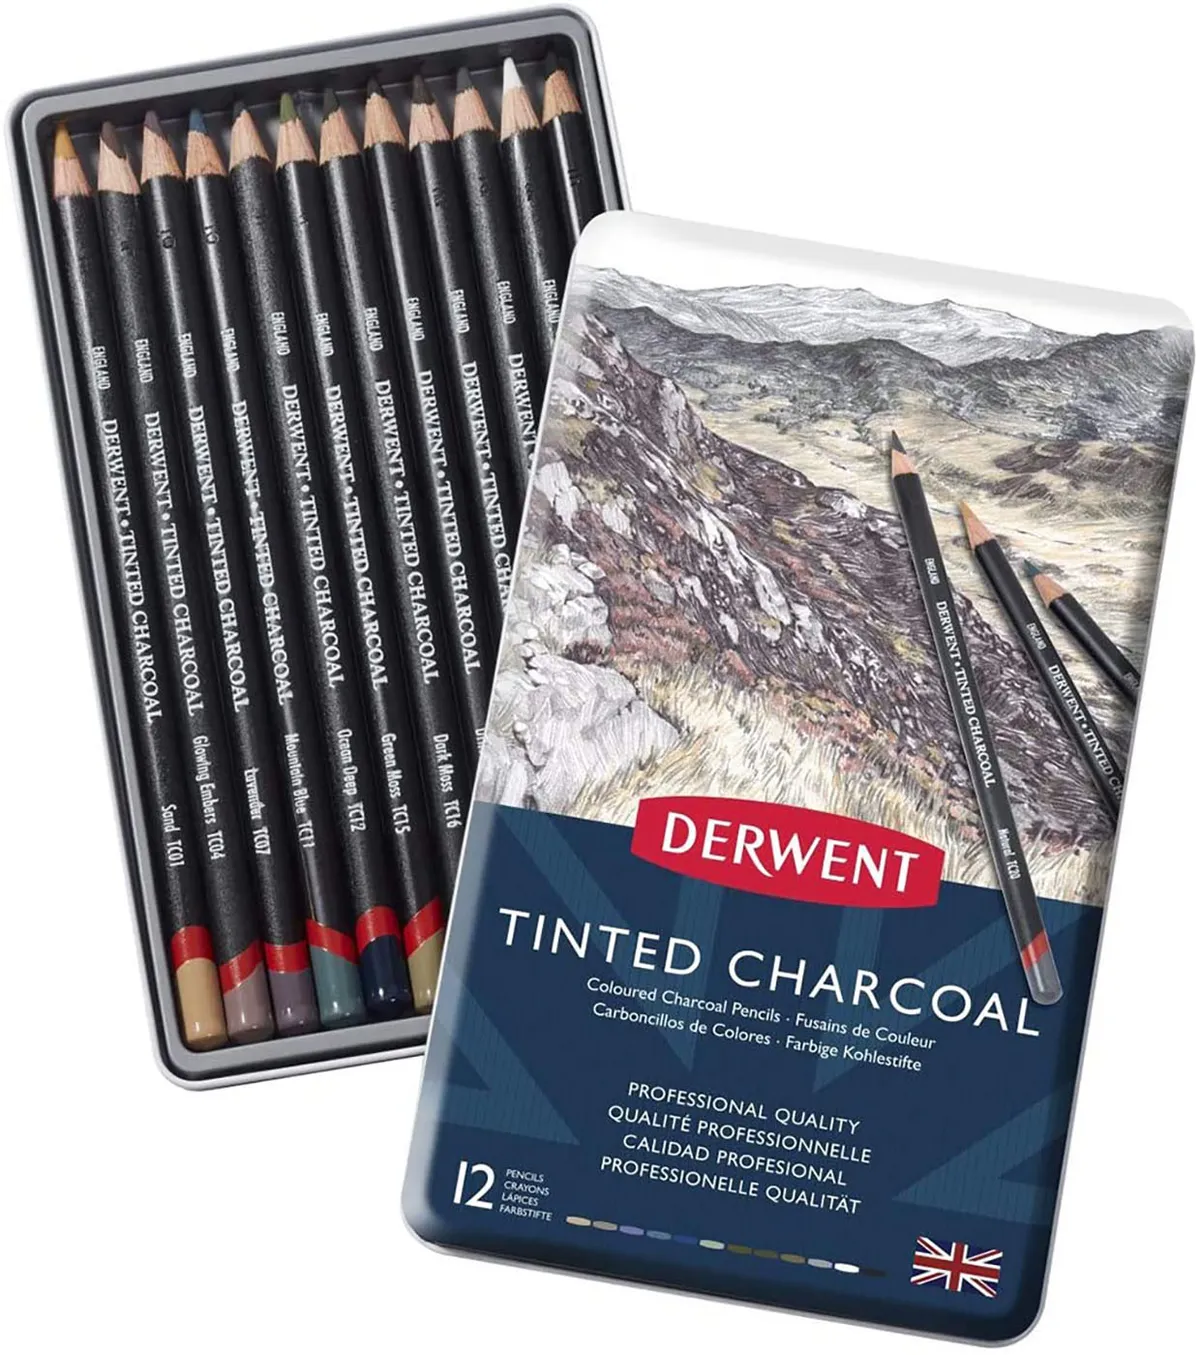 Set Of 3 White Charcoal Pencils, Different Grade For Sketching And